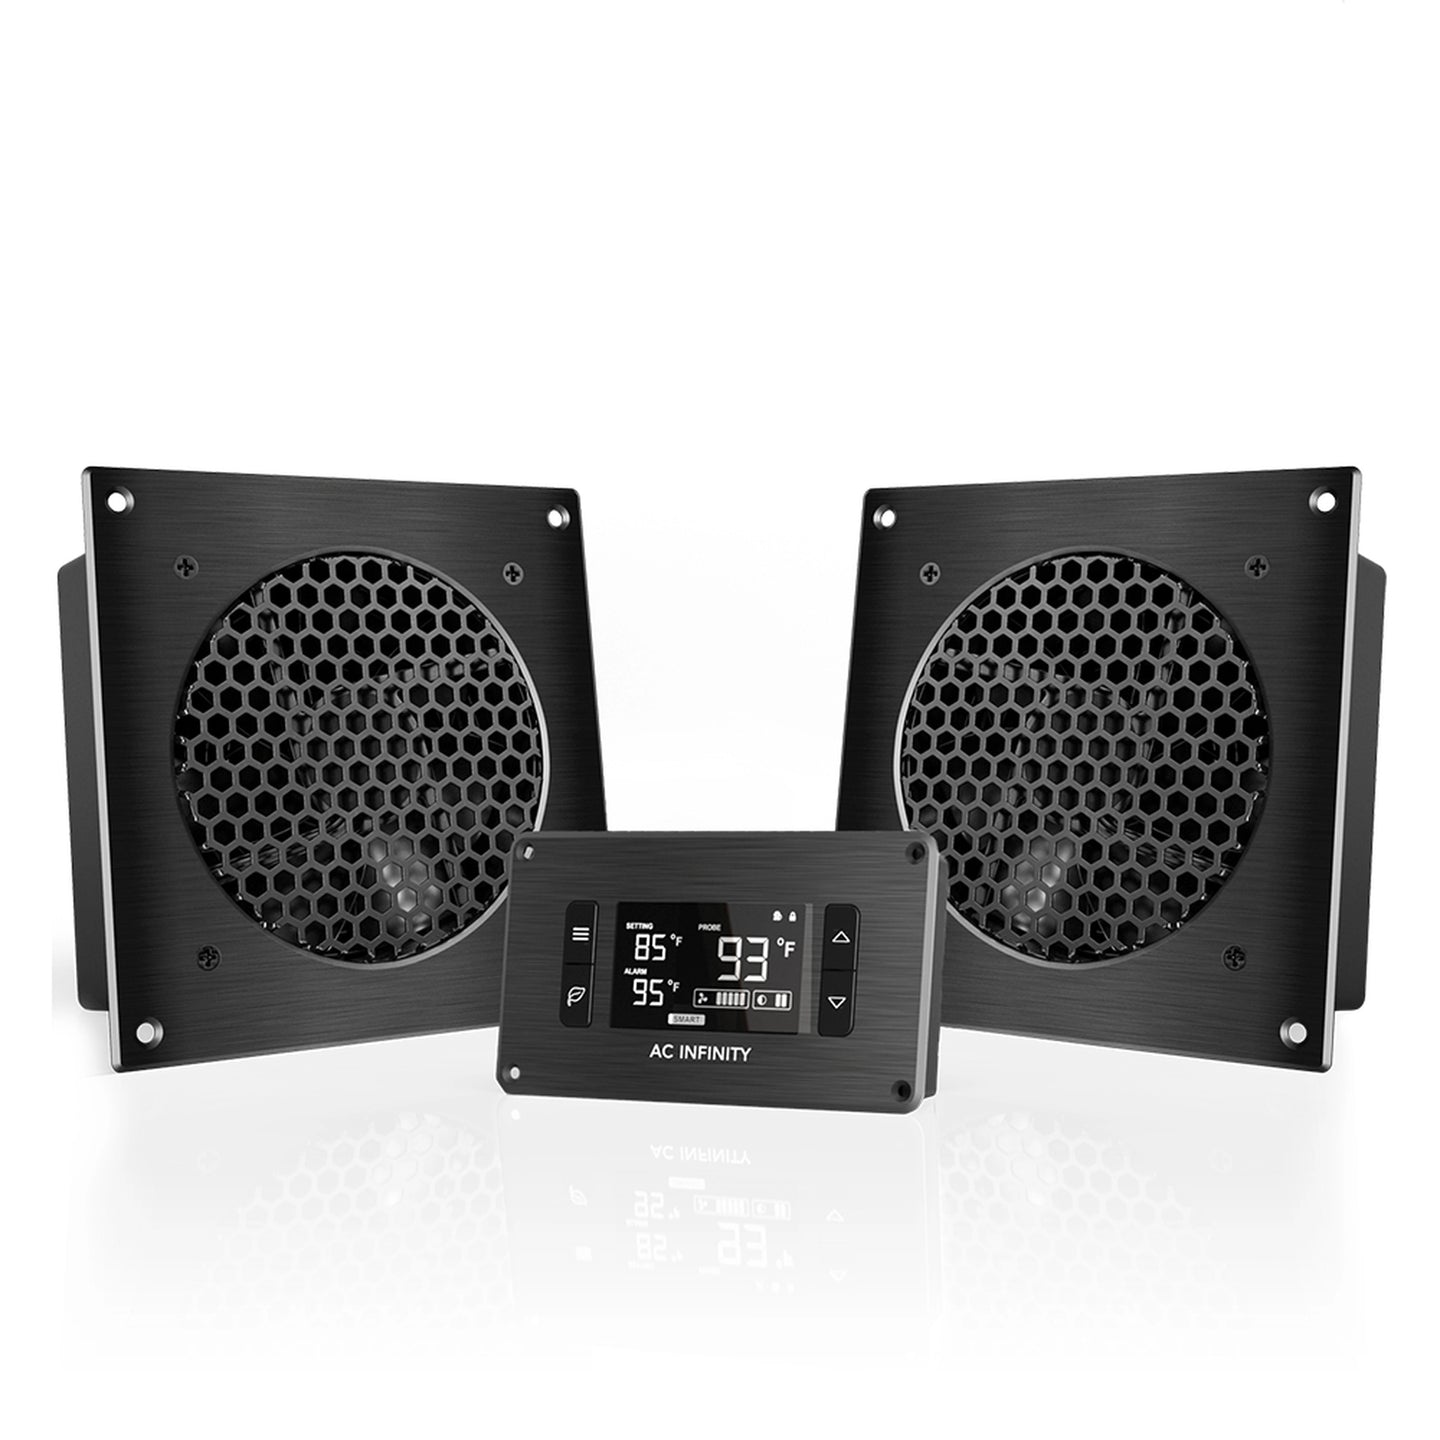 AC Infinity AIRPLATE T8, Home Theater and AV Quiet Cabinet Cooling Dual-Fan System, 6 Inch